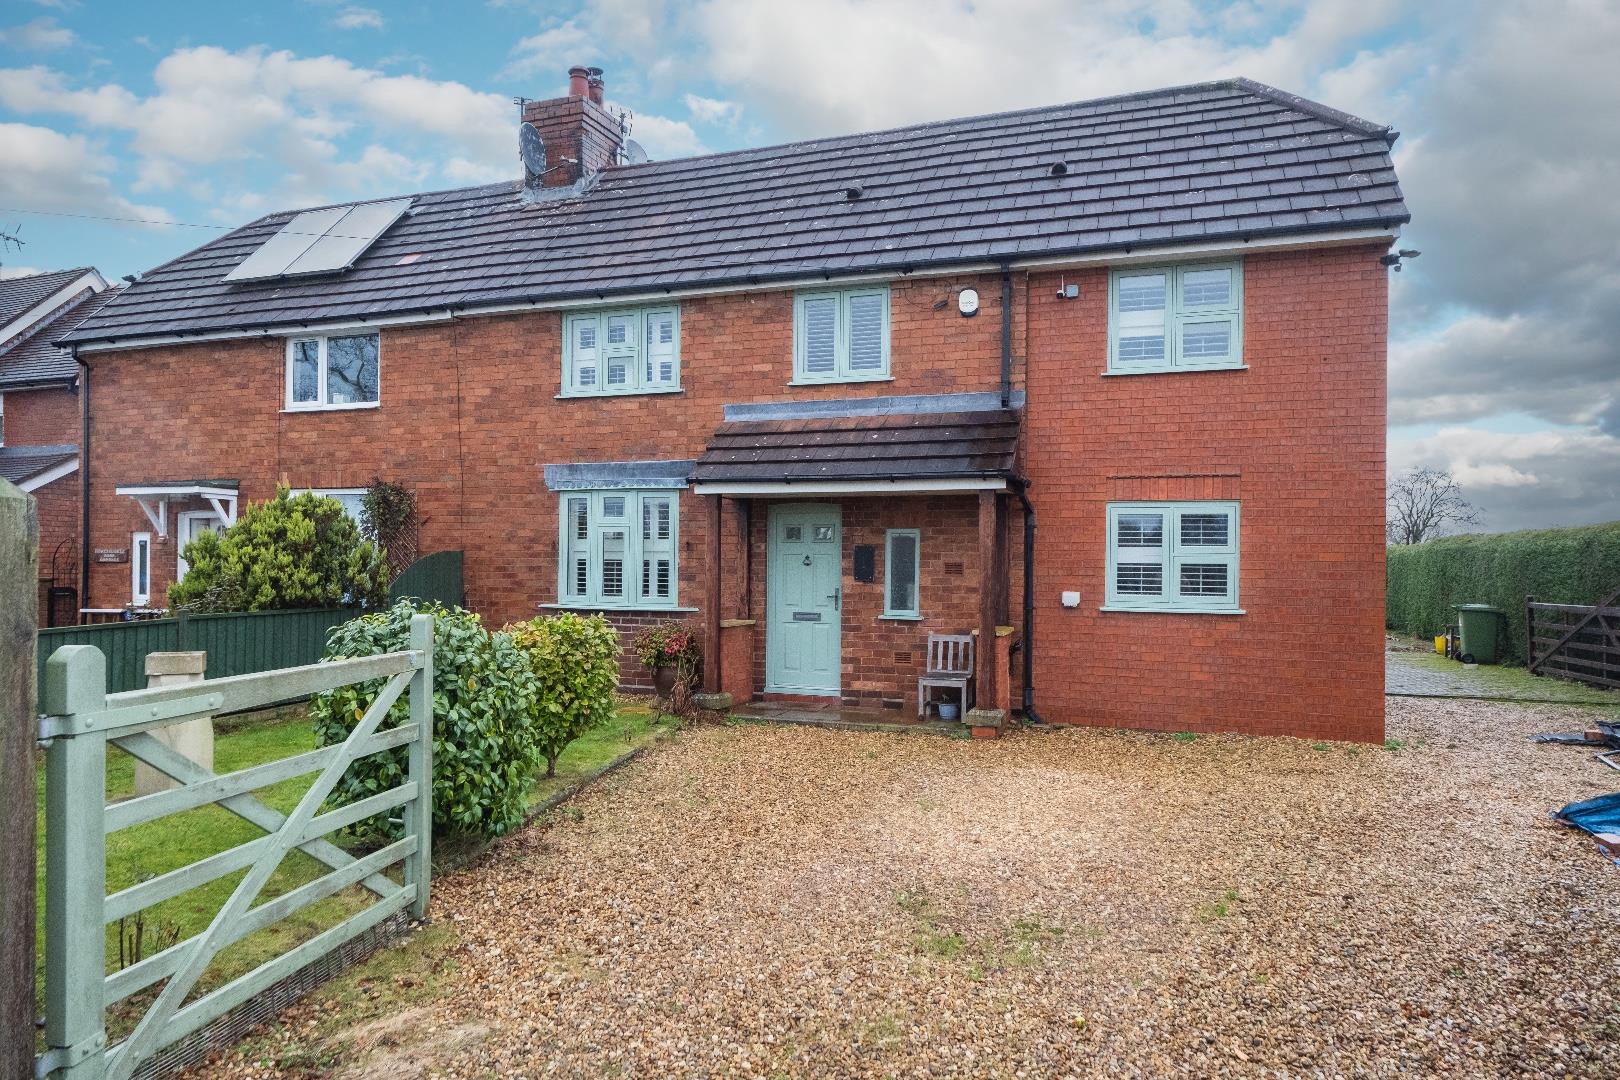 3 bedroom  Semi Detached House for Sale in Little Budworth